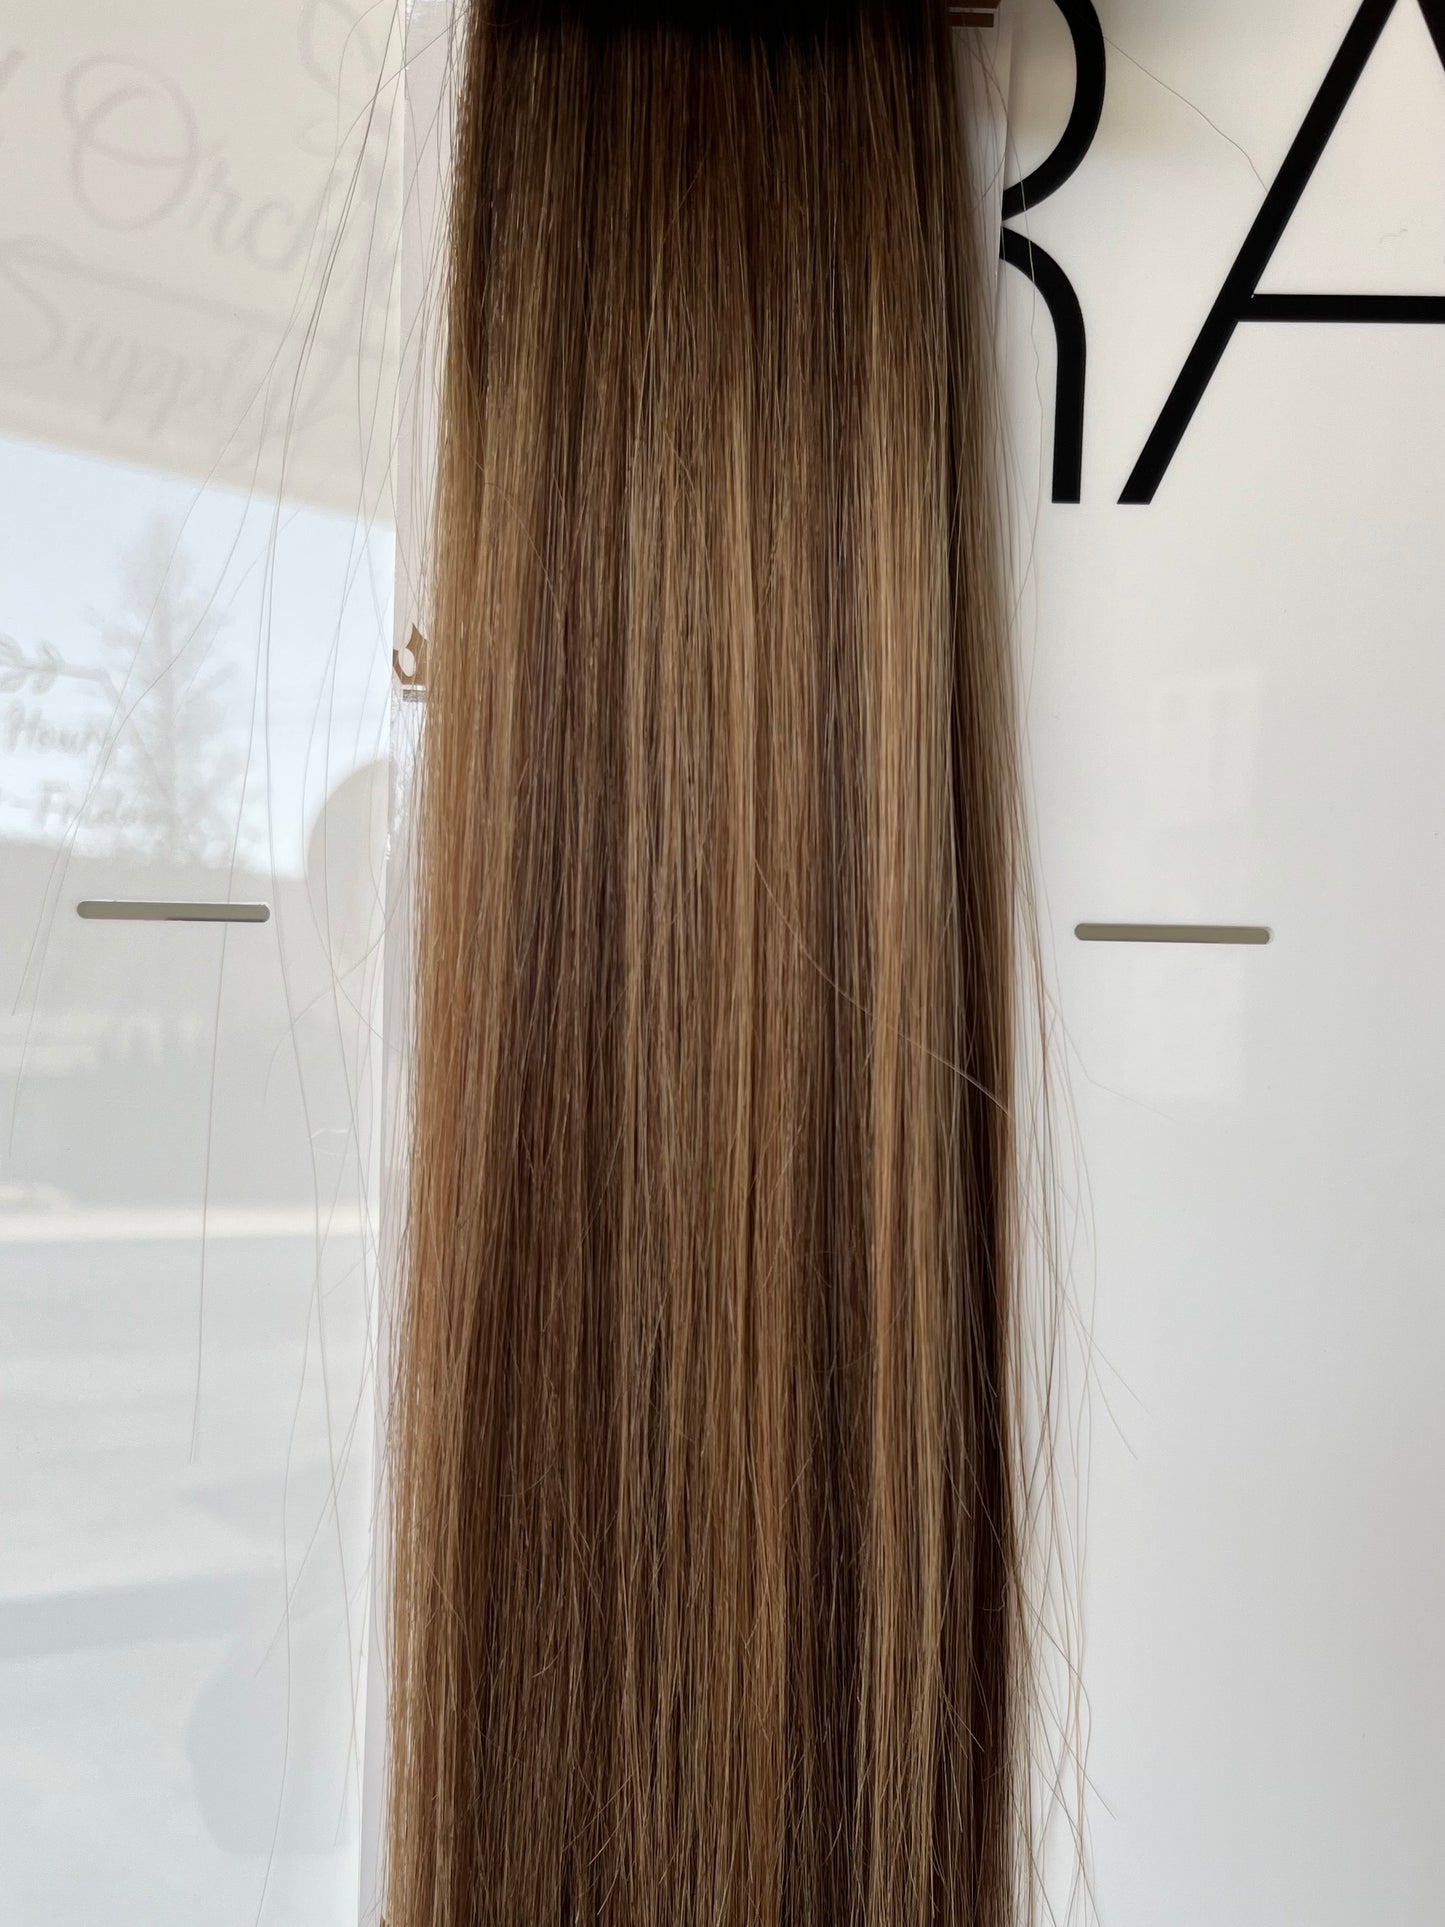 RETAIL TAPE IN EXTENSIONS - BALAYAGE - SWEETHEART